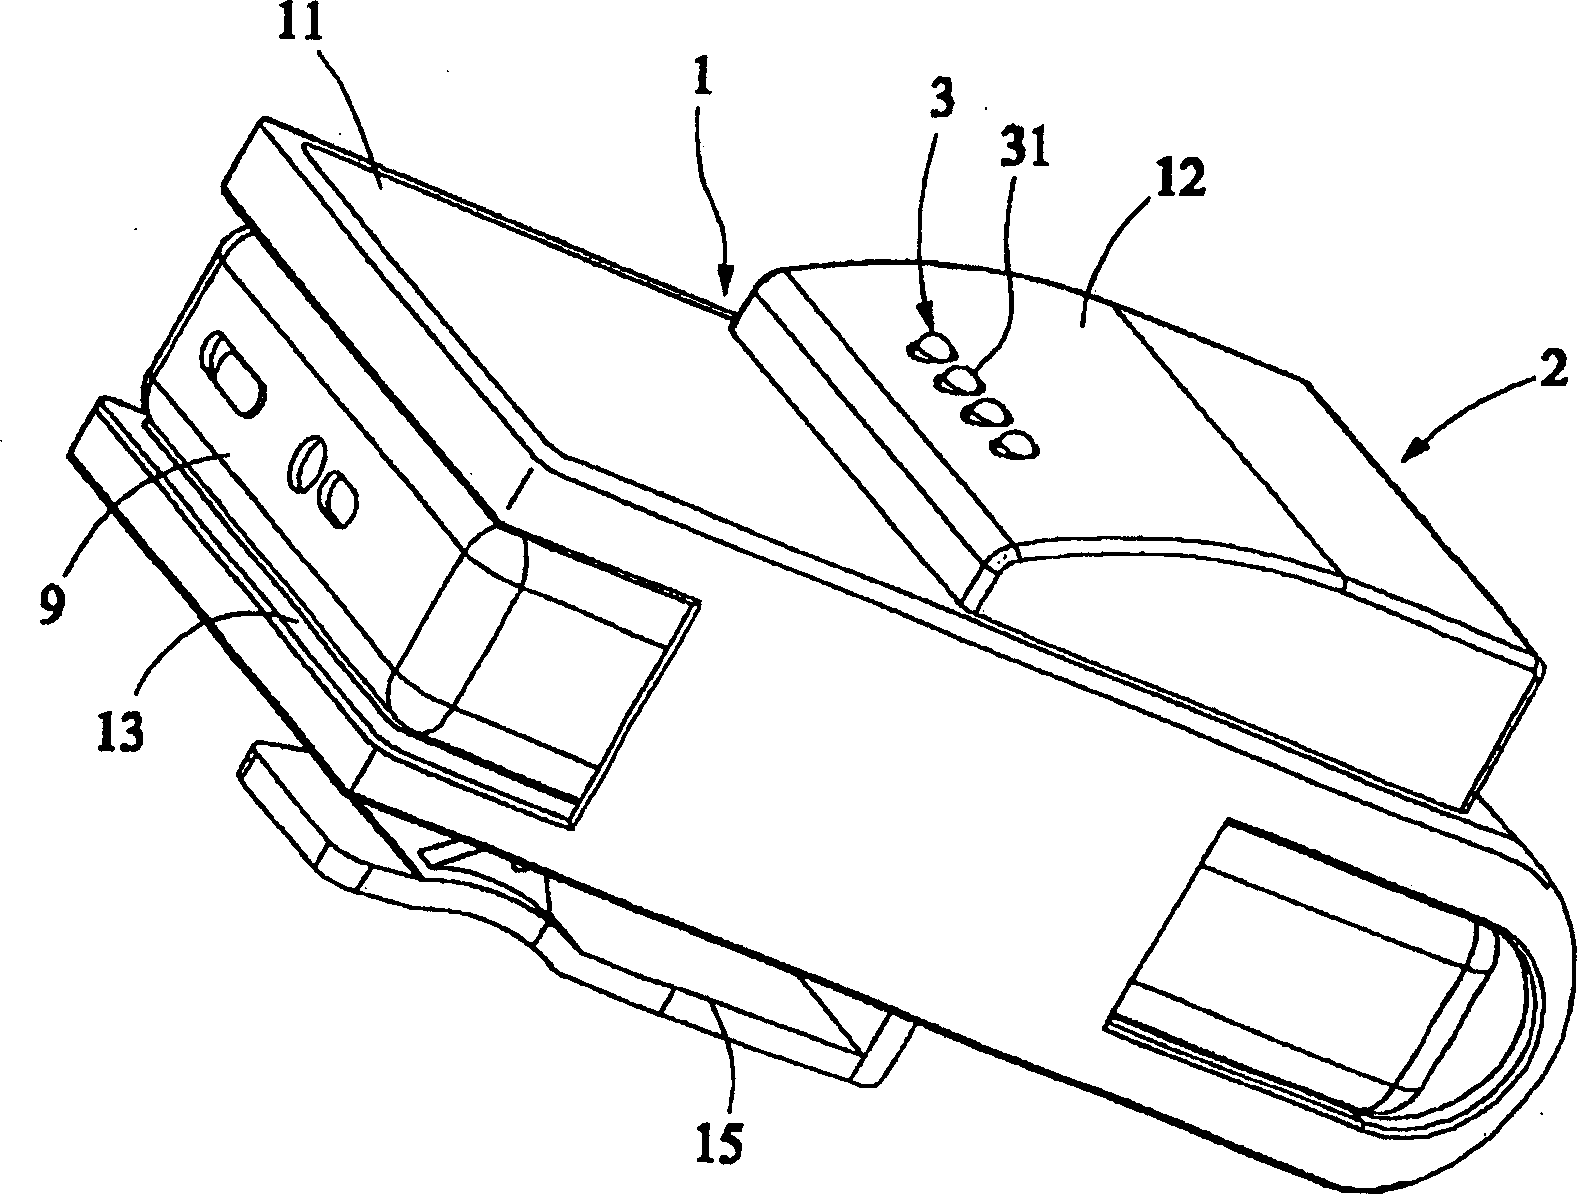 Portable power supply unit concurrently having transmission interface and charging system